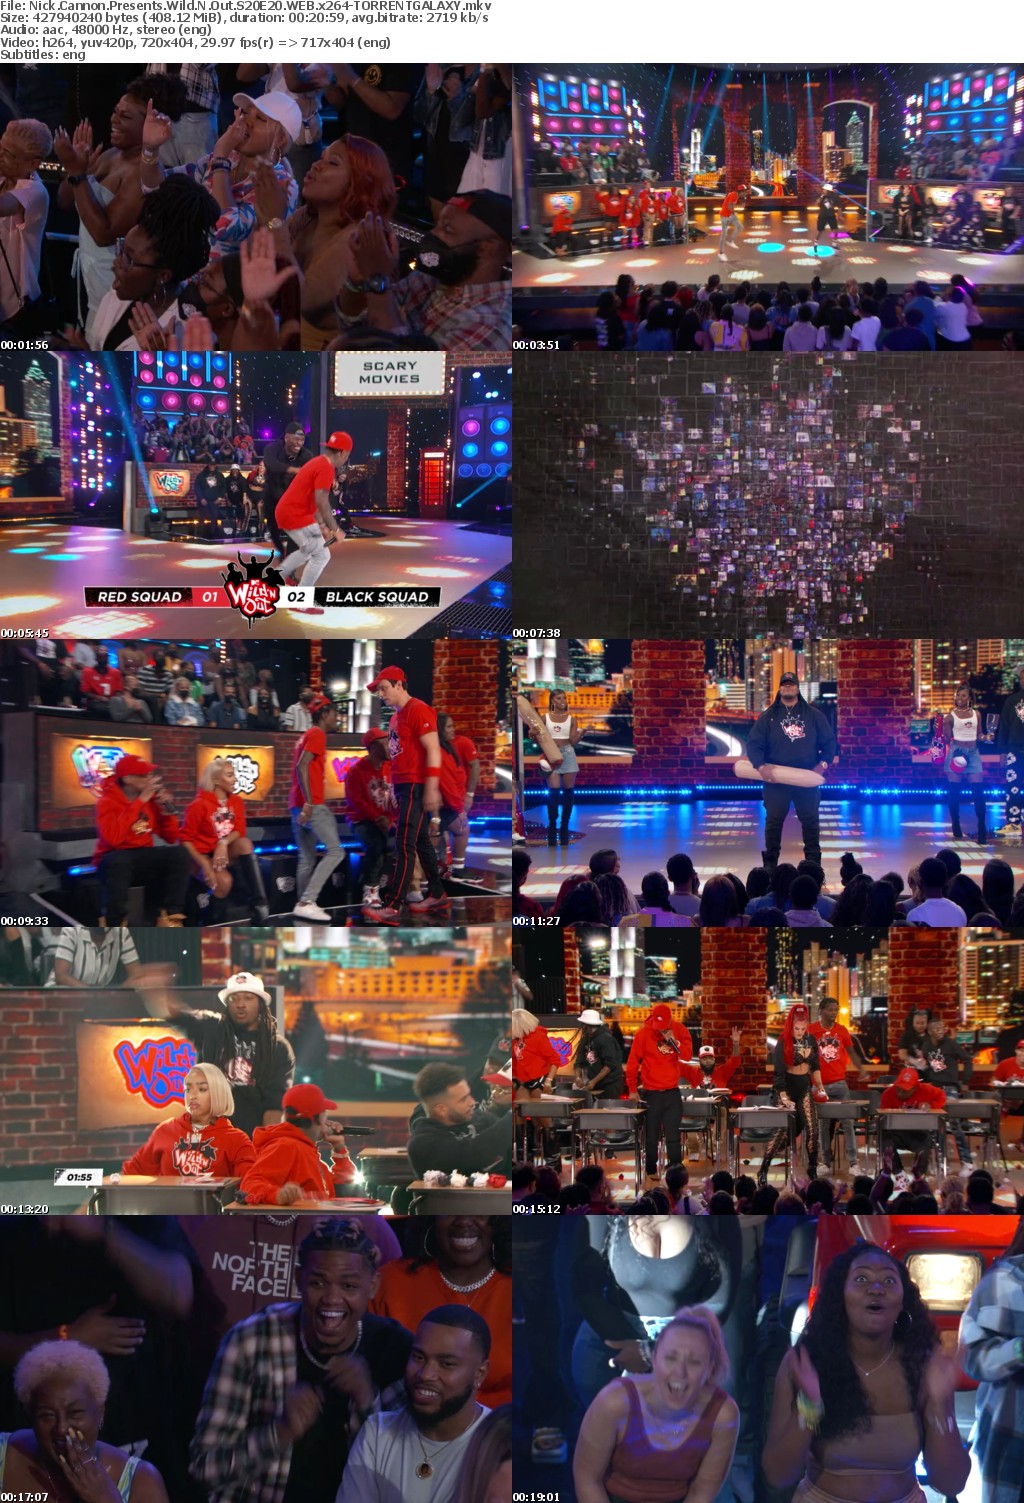 Nick Cannon Presents Wild N Out S20E20 WEB x264-GALAXY